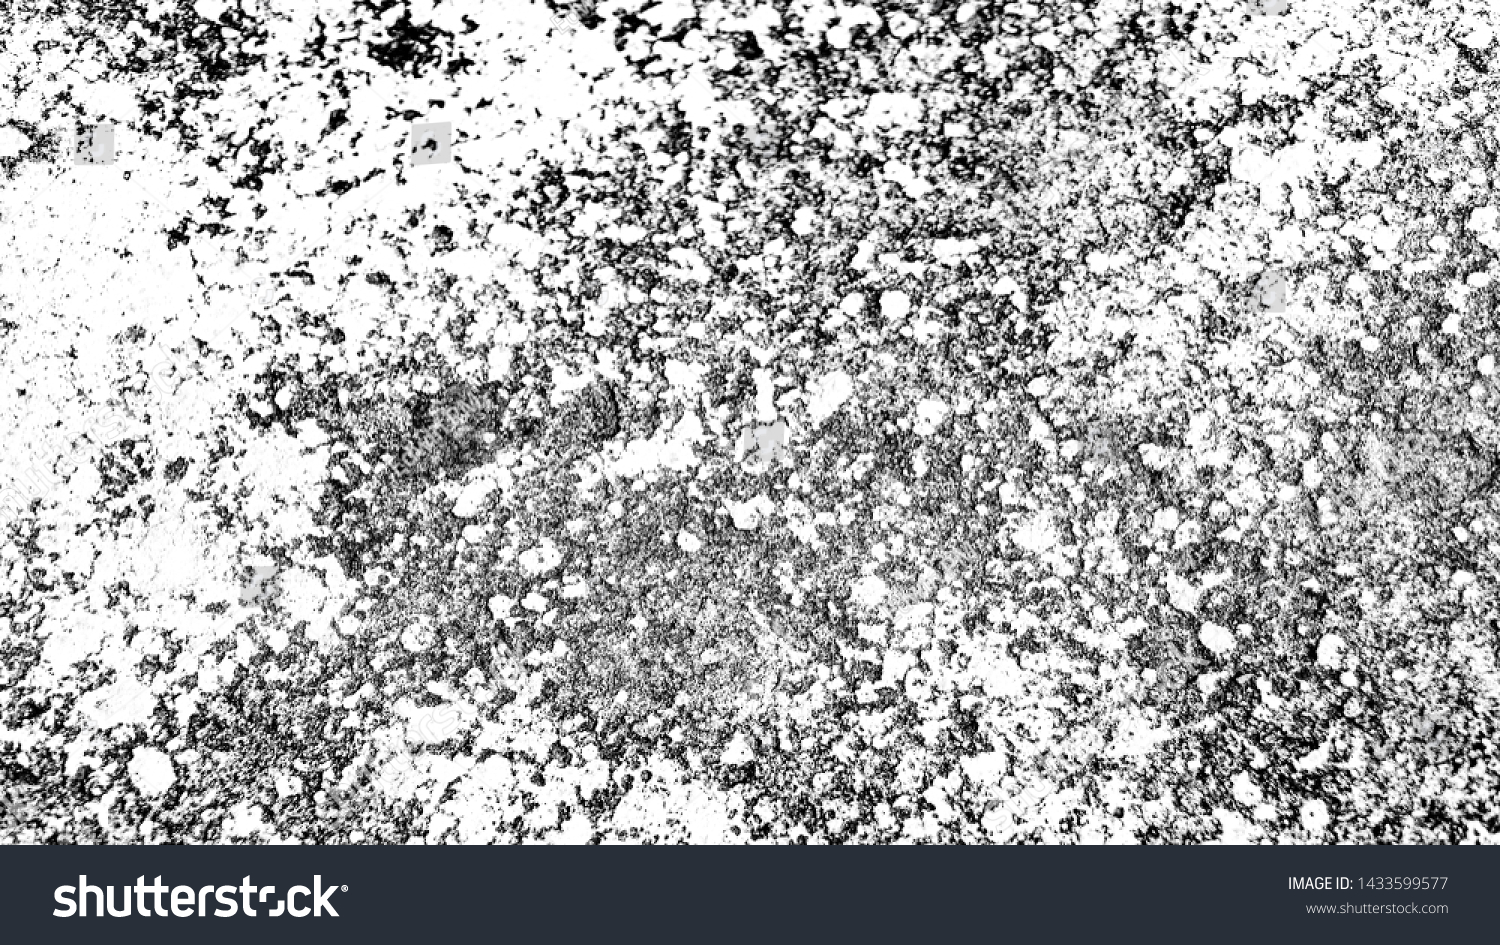 abstract background for effect rough, effect grunge, multiply effect #1433599577